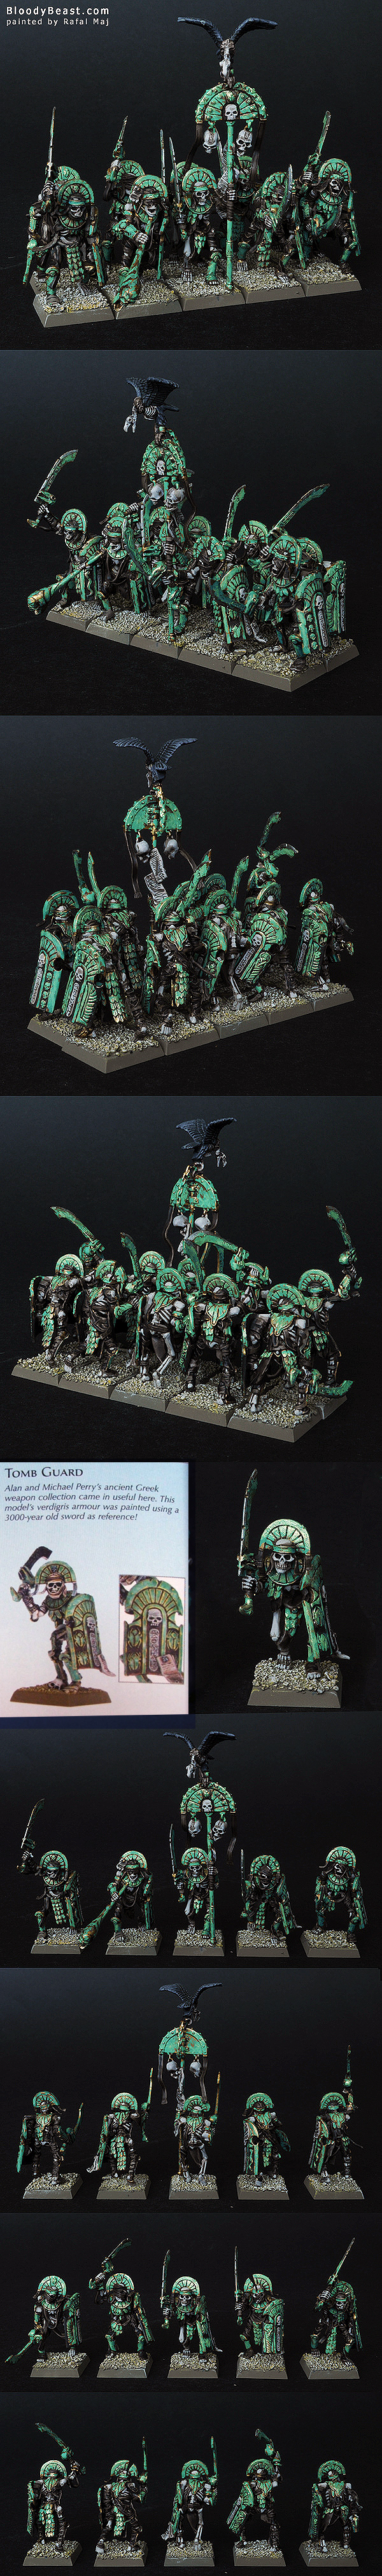 Tomb Kings Tomb Guards Perry's Style painted by Rafal Maj (BloodyBeast.com)